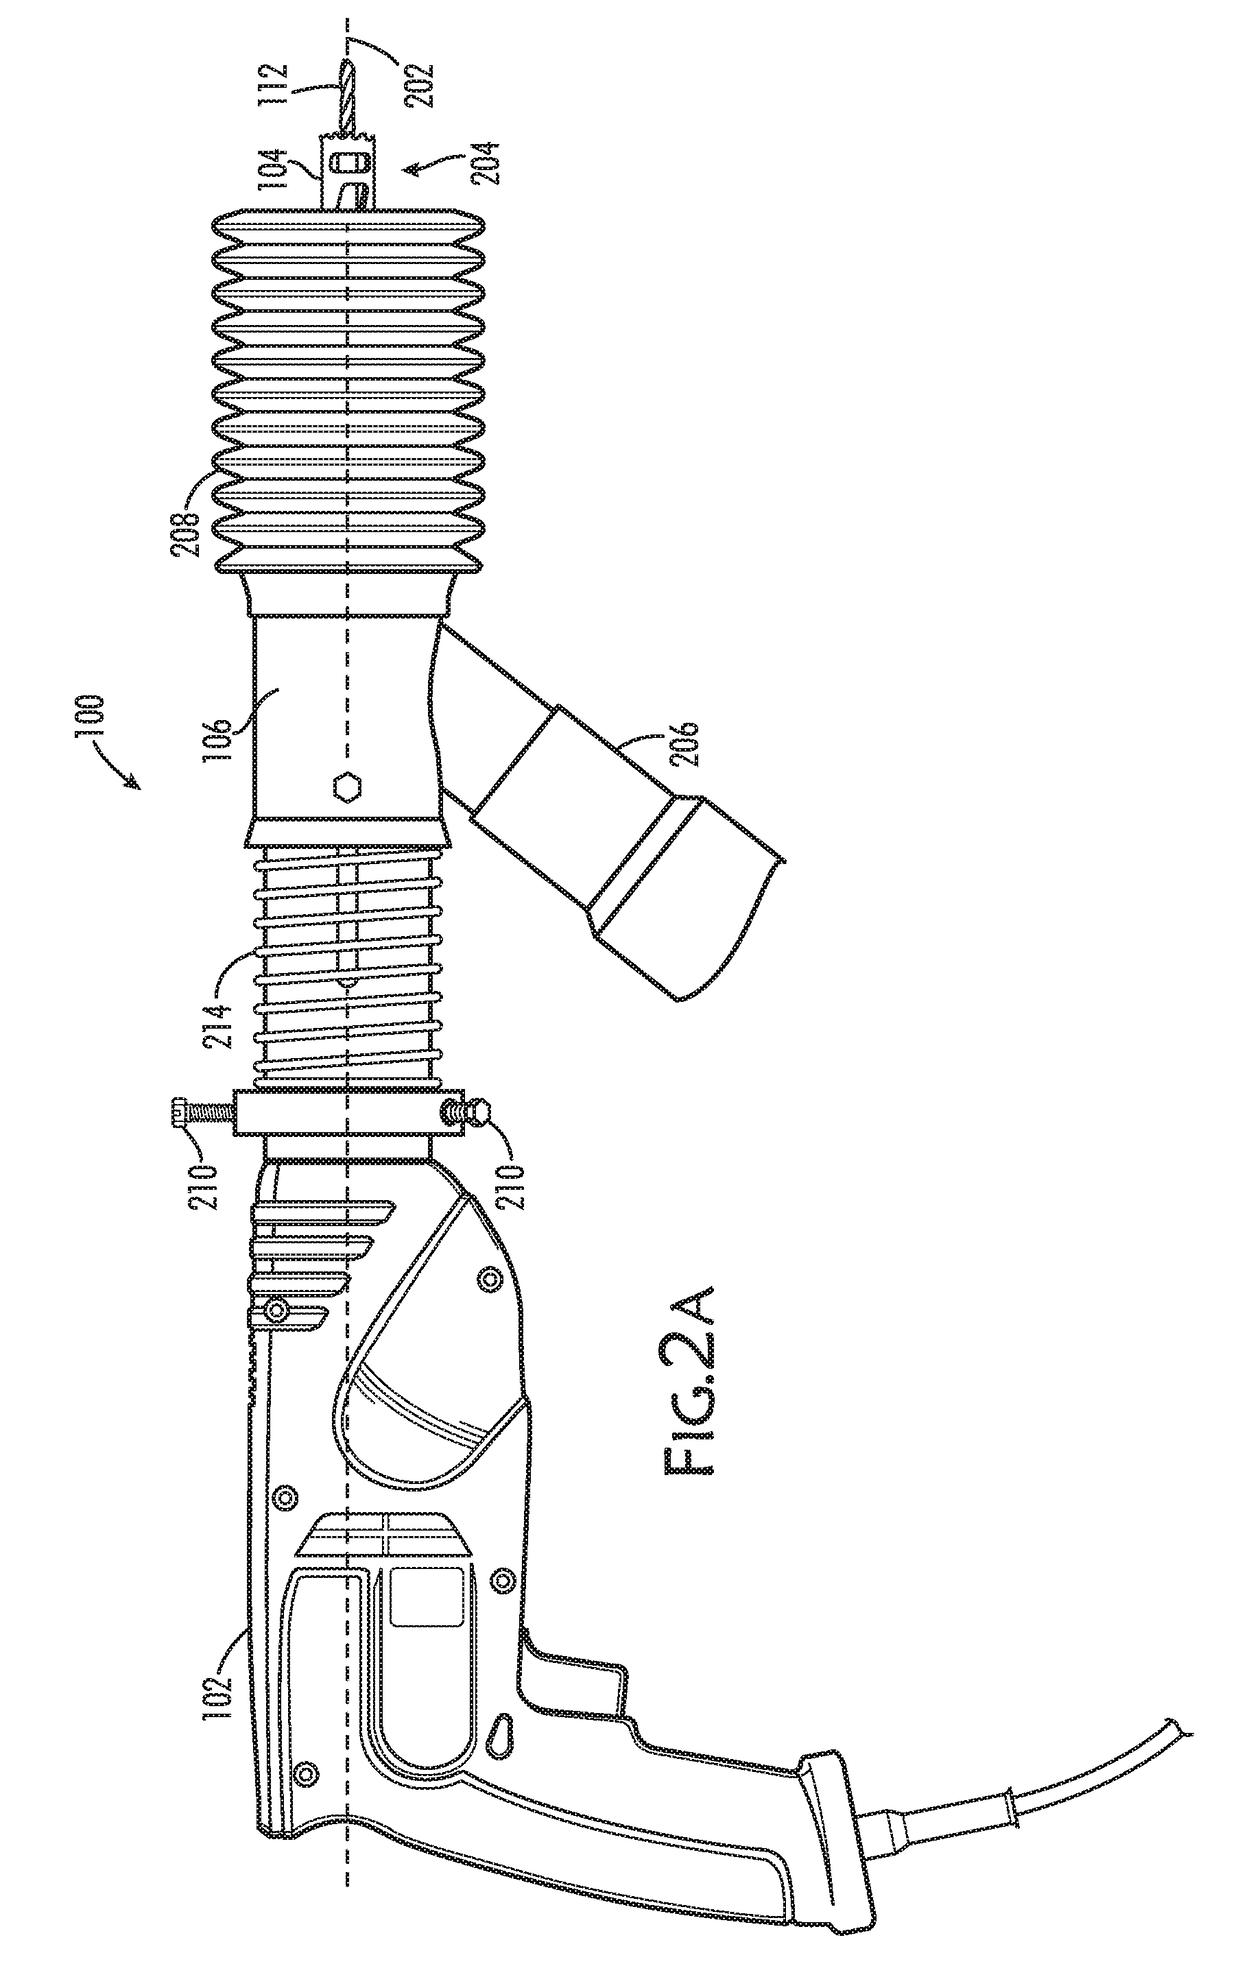 Drilling apparatus and methods of using same